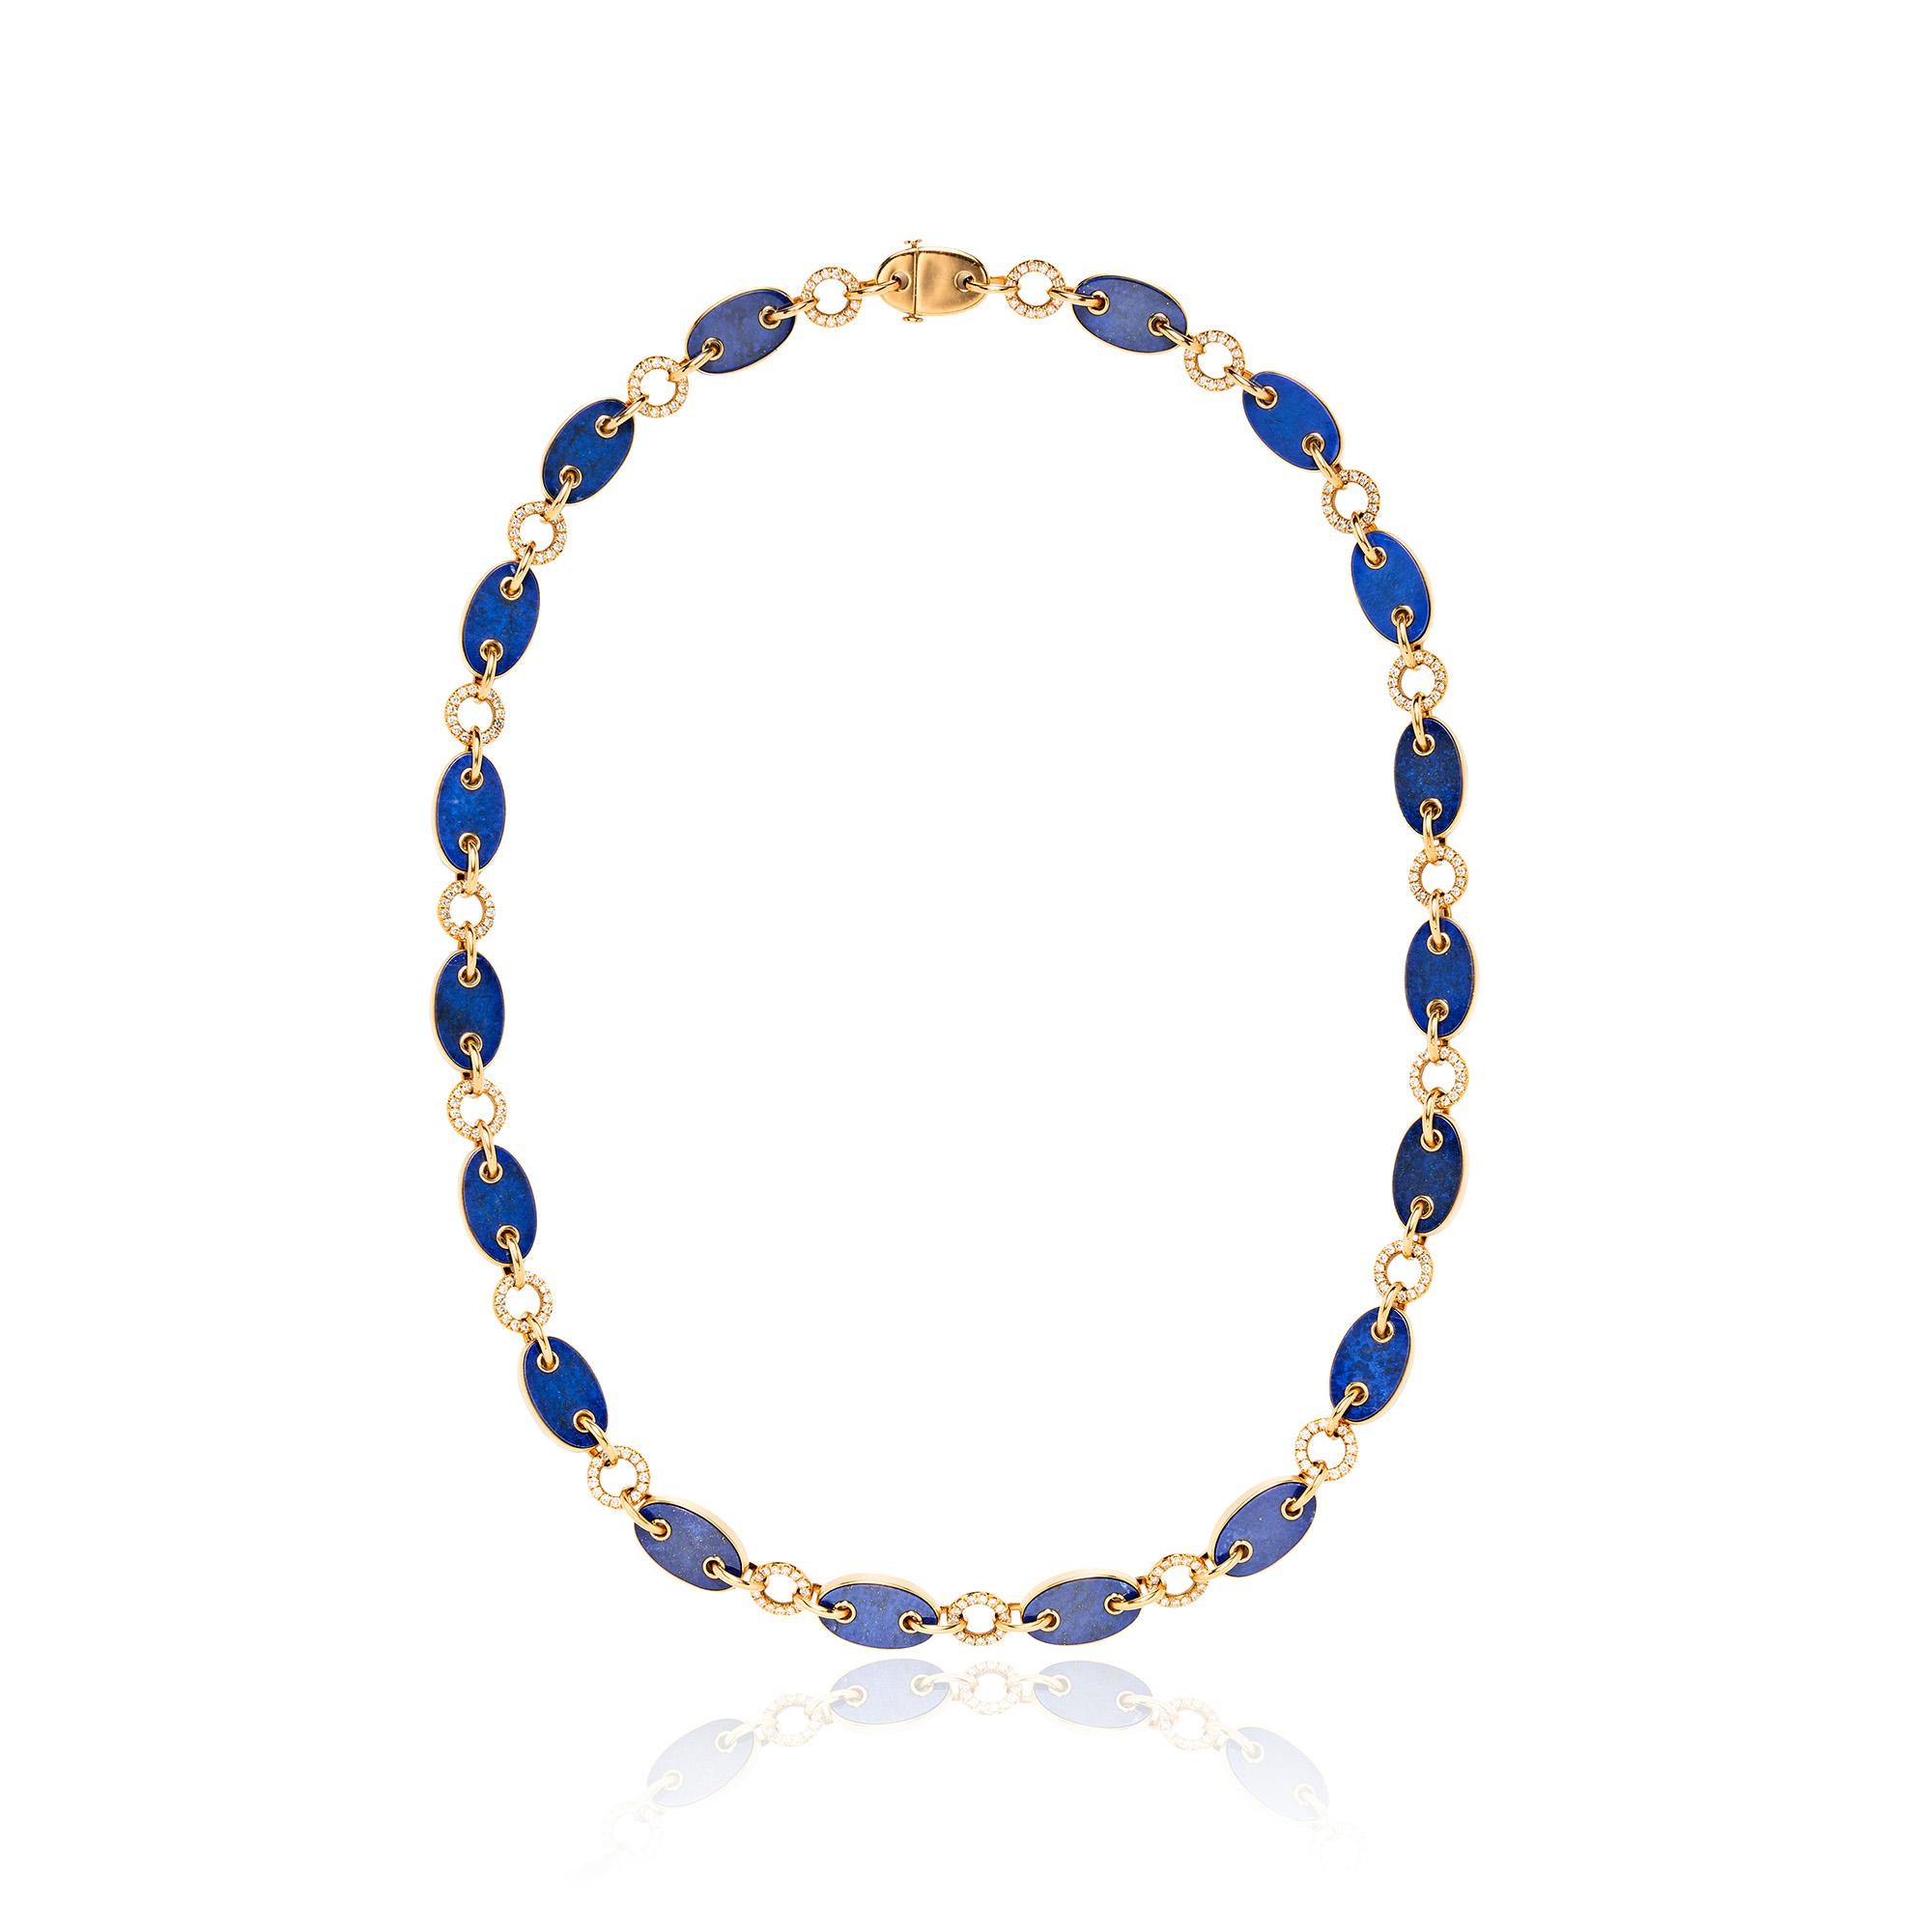 Known for their fine lapidary skills and expert workmanship, Aletto Brothers has crafted this substantial gold necklace of lapis lazuli-set marine links, connected by round polished gold links pavé-set with round diamonds.

Approximately 31” in